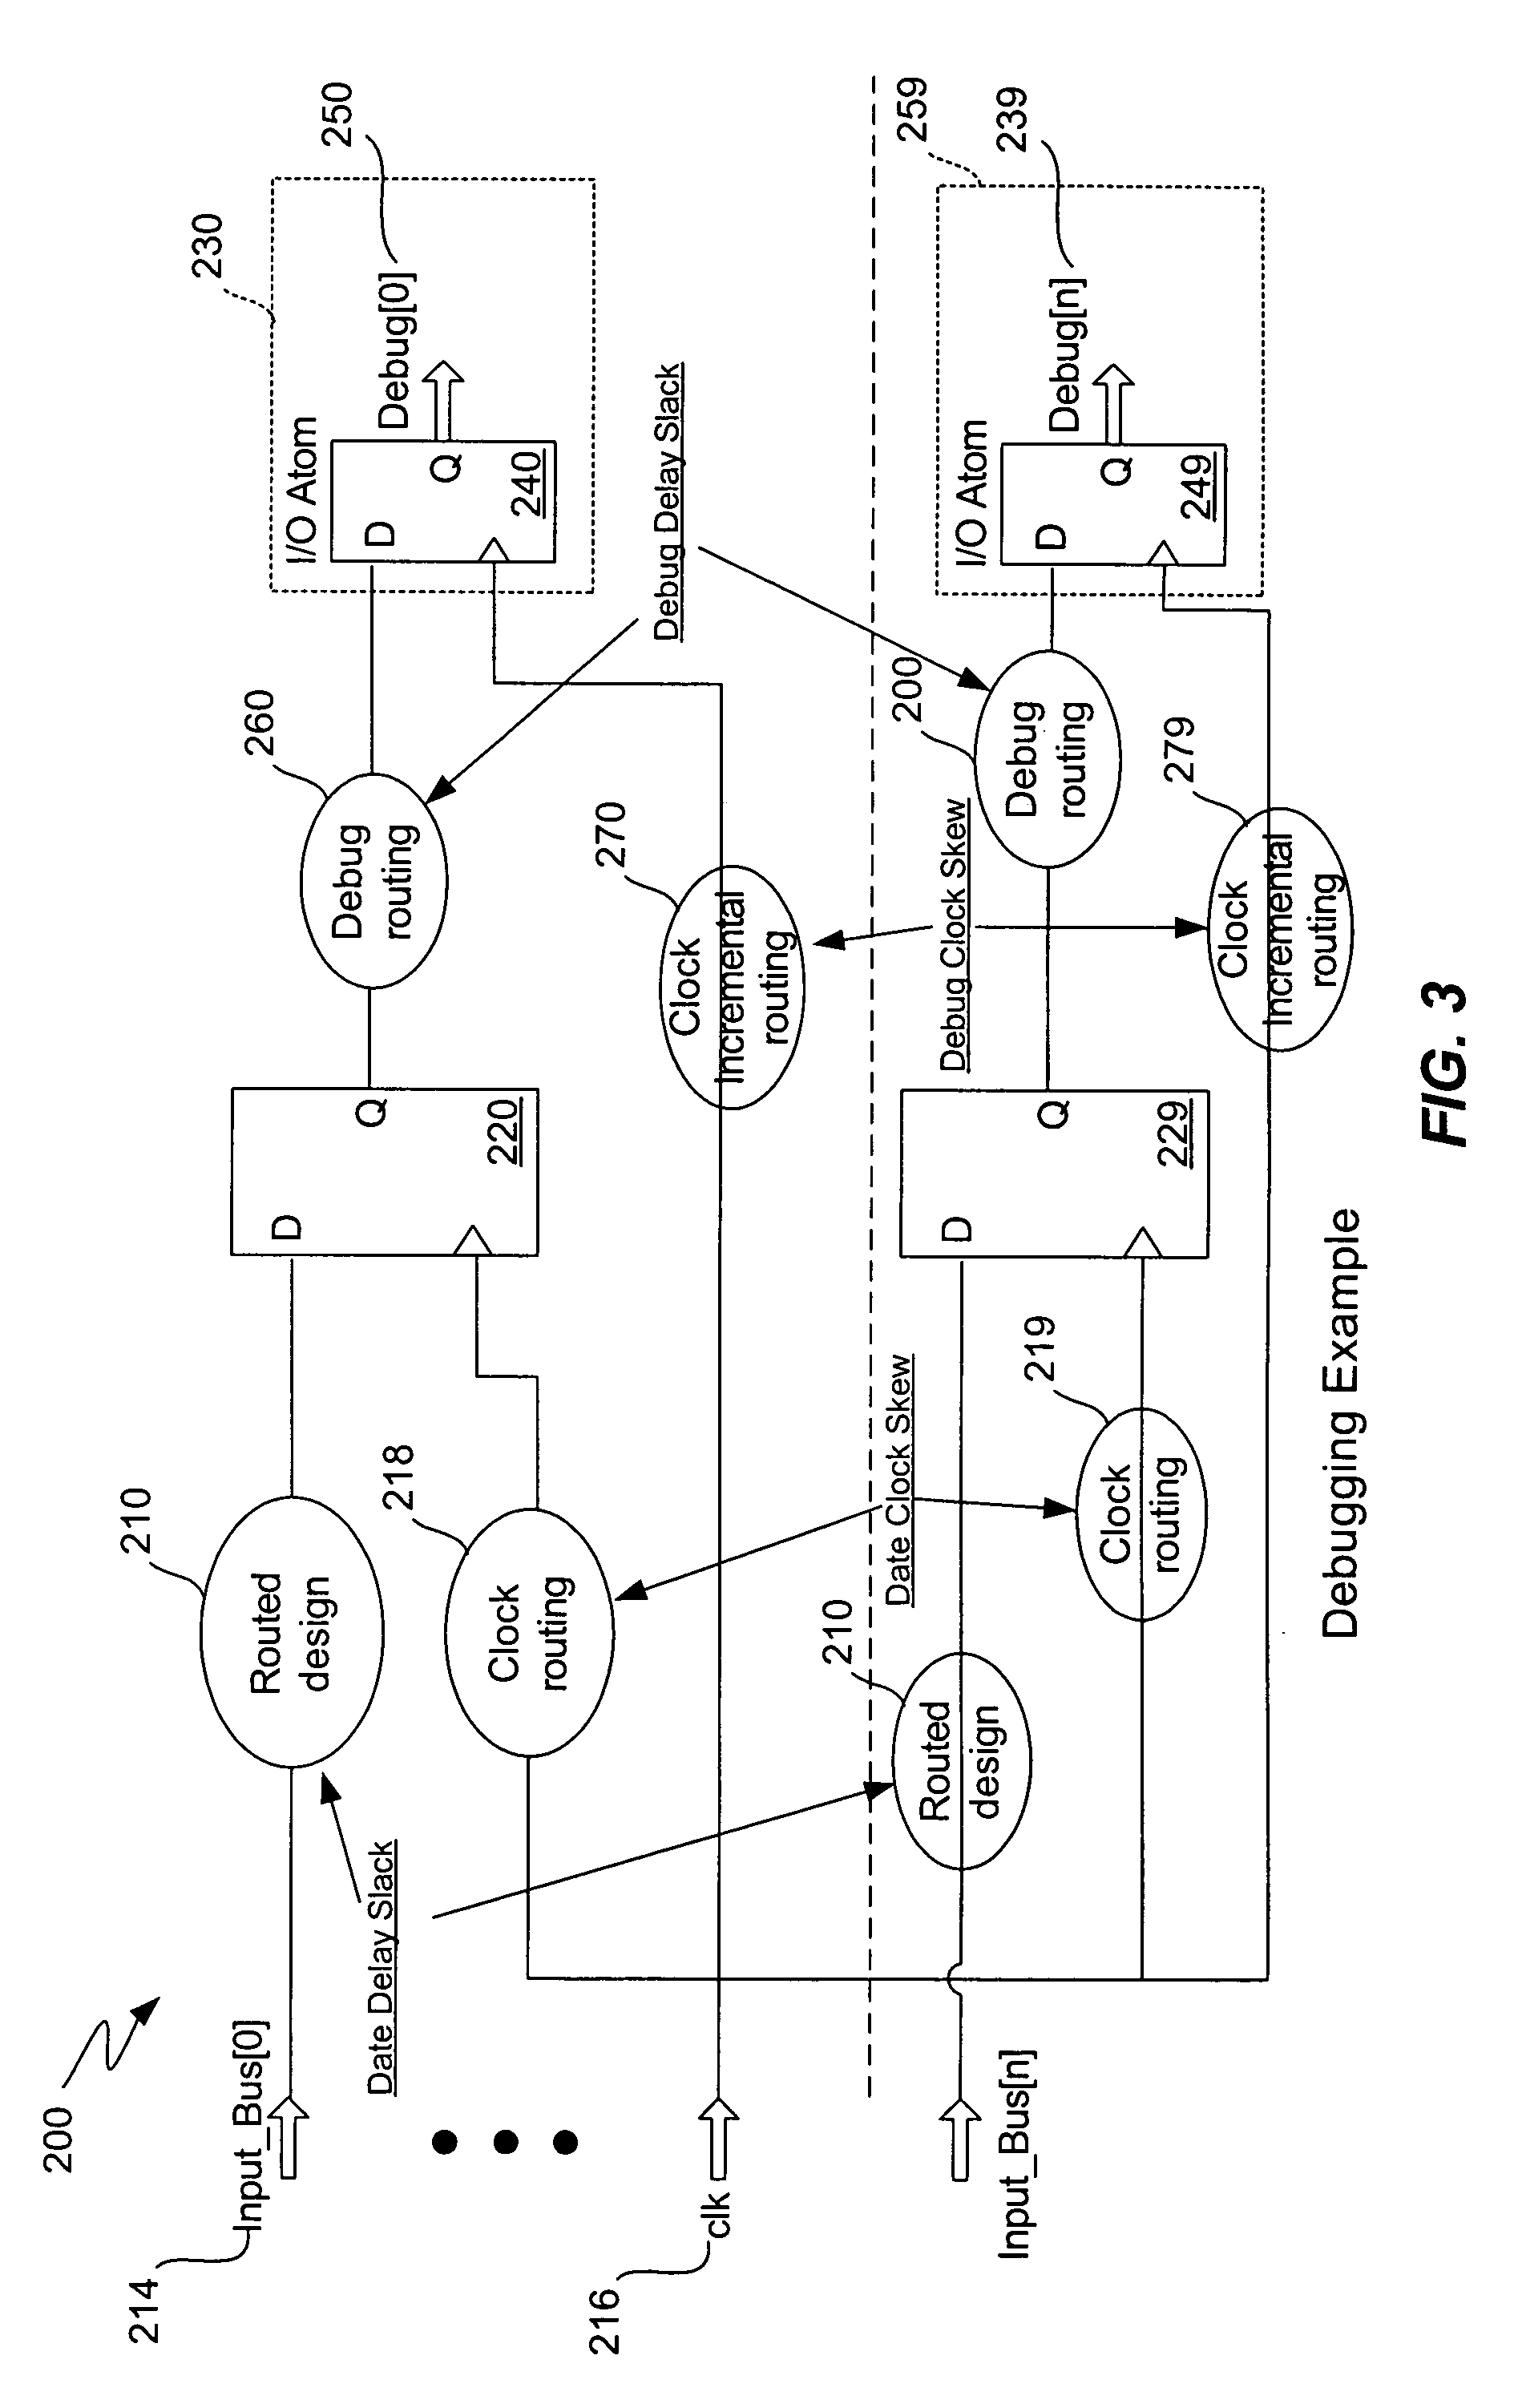 Chip debugging using incremental recompilation and register insertion